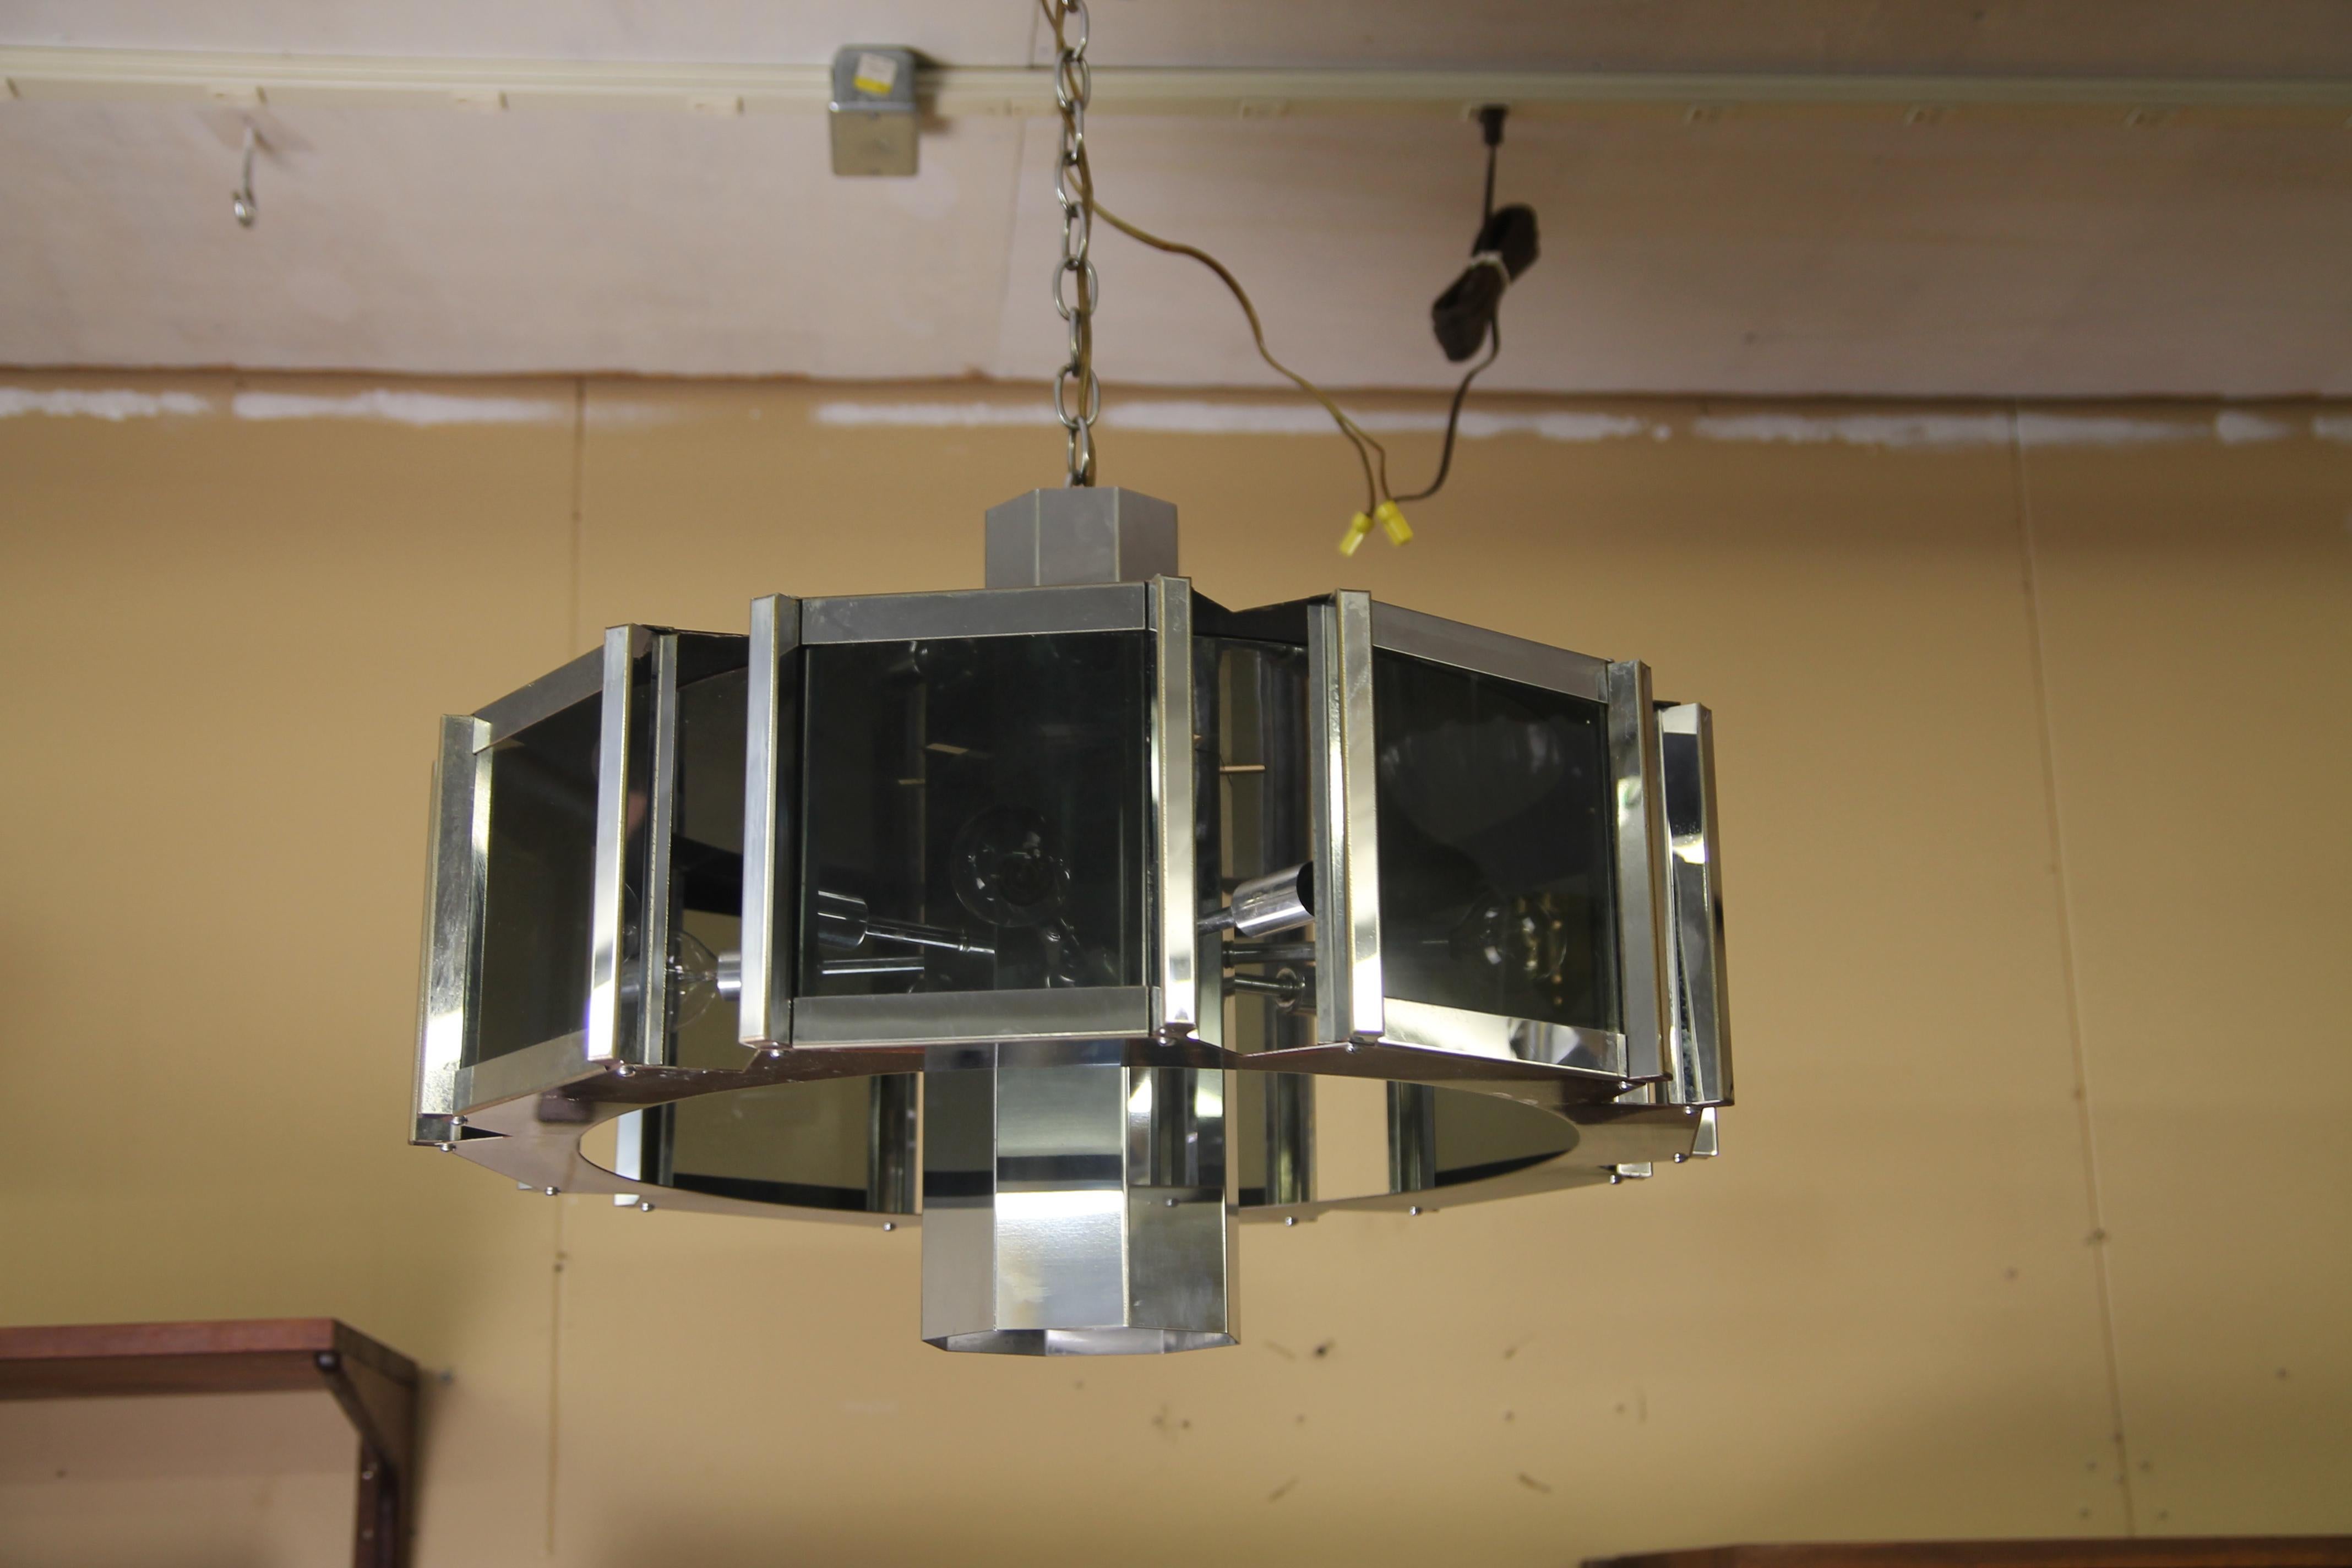 Great 1970s chrome chandelier by Frederick Raymond. Has one center light with 8 smaller lights that shine through the 8 glass panels. The center light can be switched off.